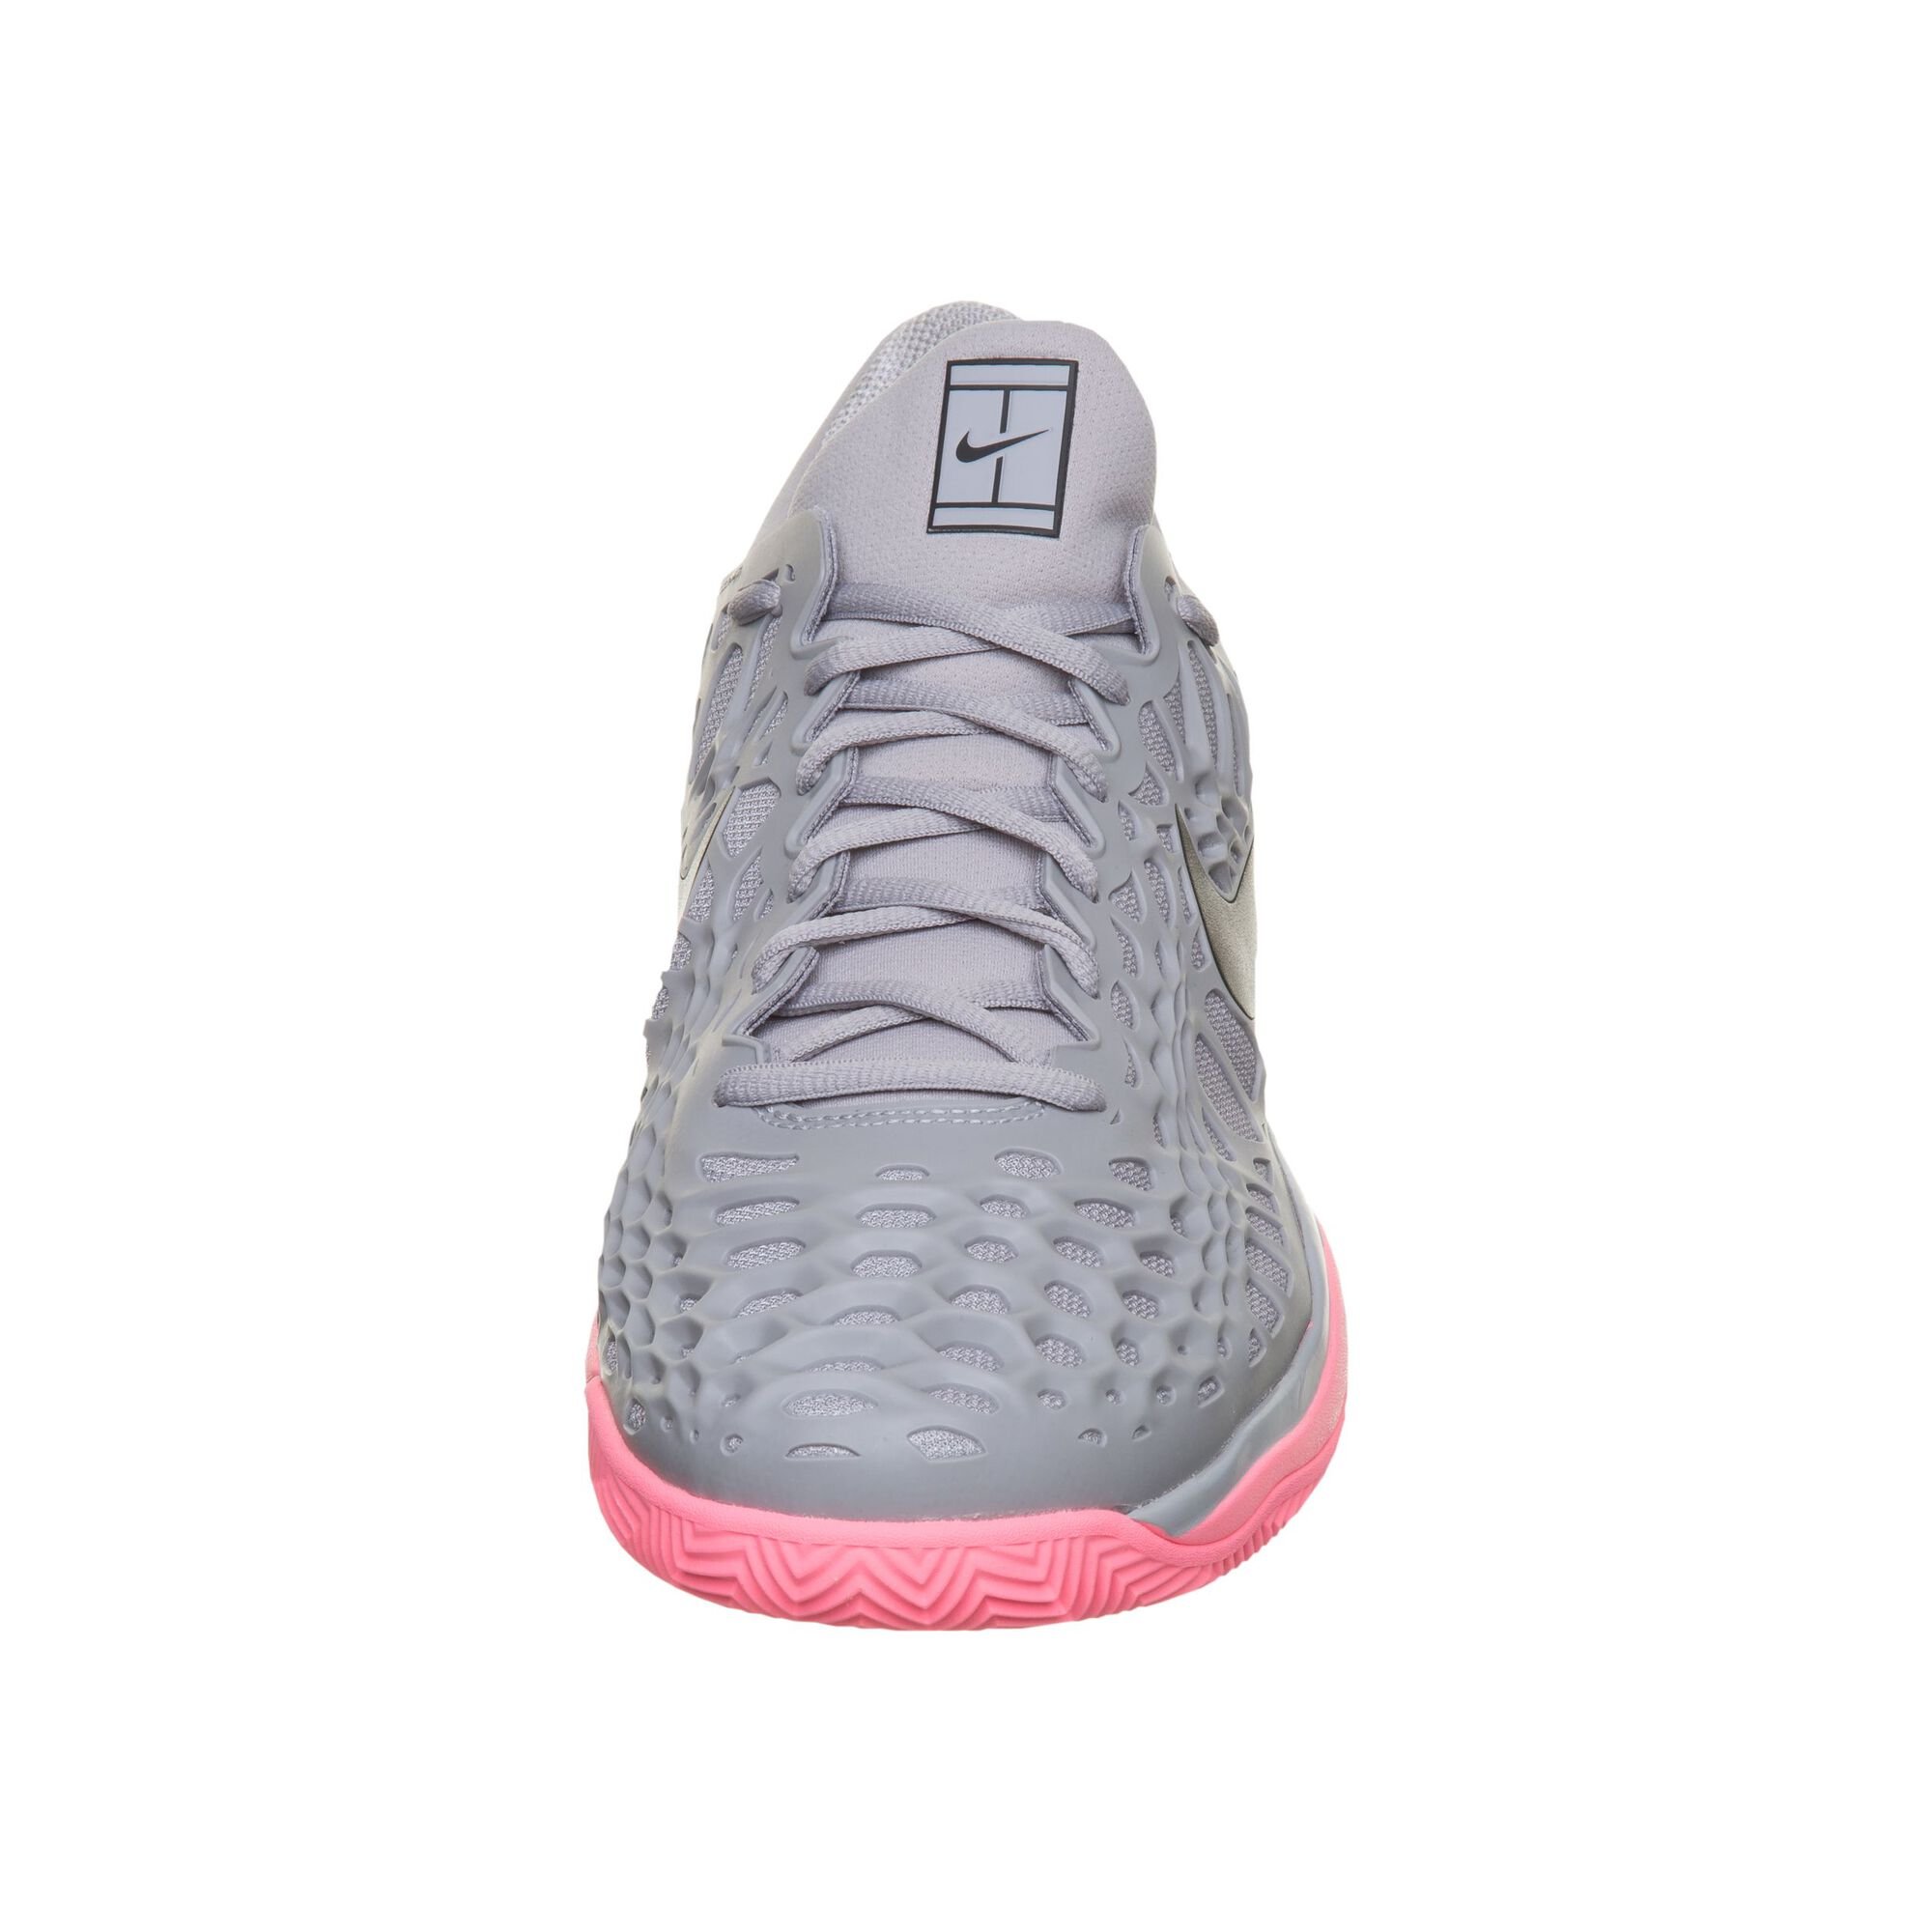 Nike Zoom Cage 3 Court Shoe Special Men - Grey, Pink online | Tennis-Point